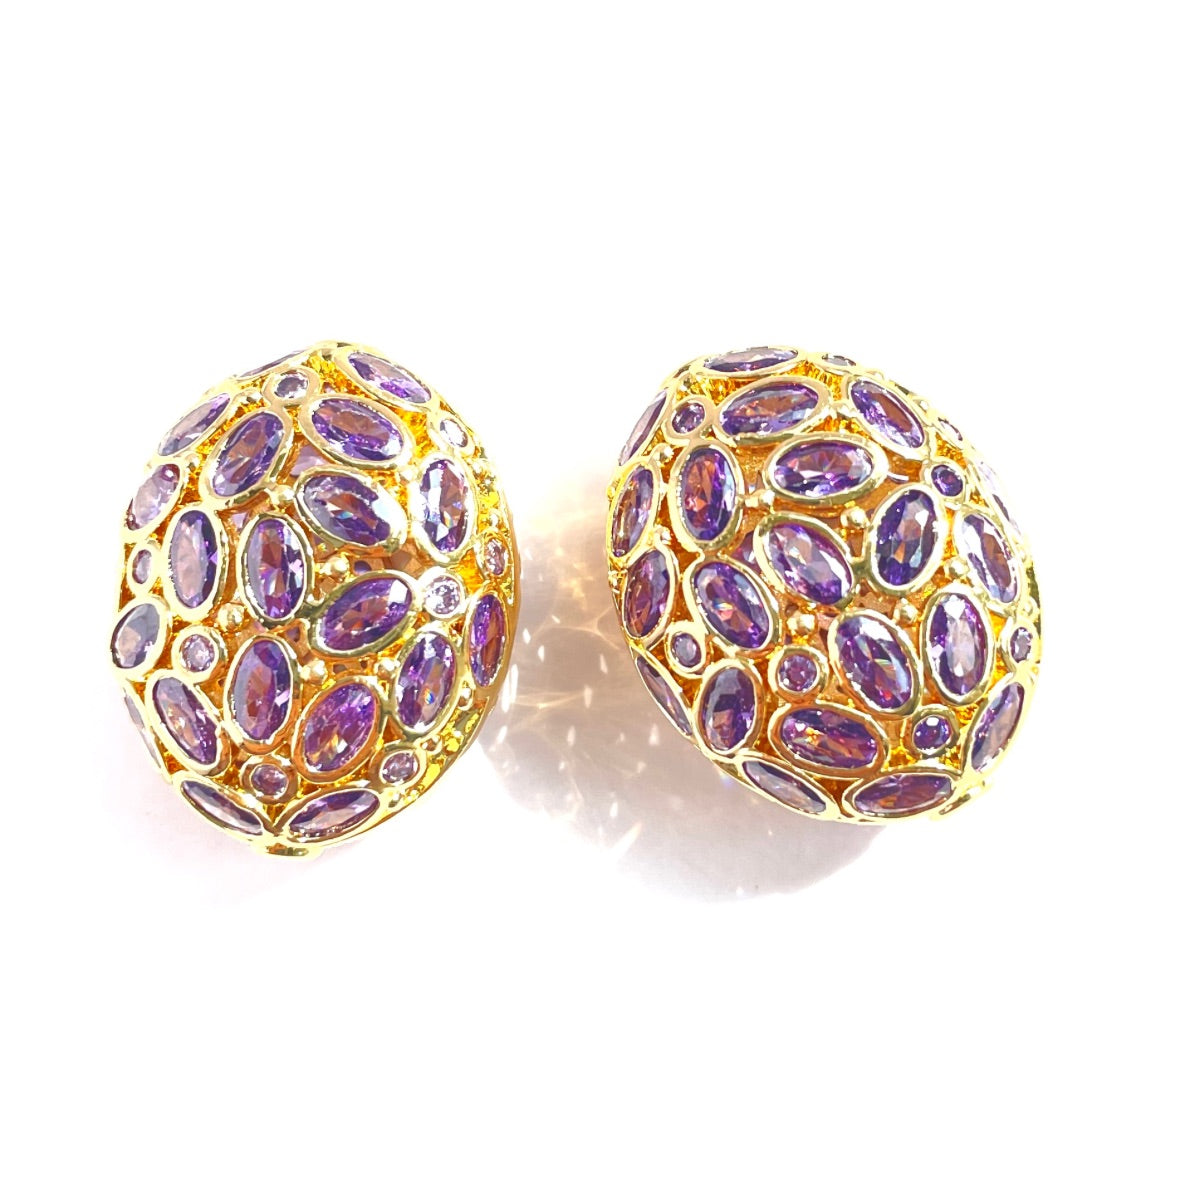 5pc 26.7*21mm Big Size Purple CZ Hollow Flat Oval Centerpiece CZ Egg Beads Spacers Purple on Gold CZ Paved Spacers Egg Beads Charms Beads Beyond